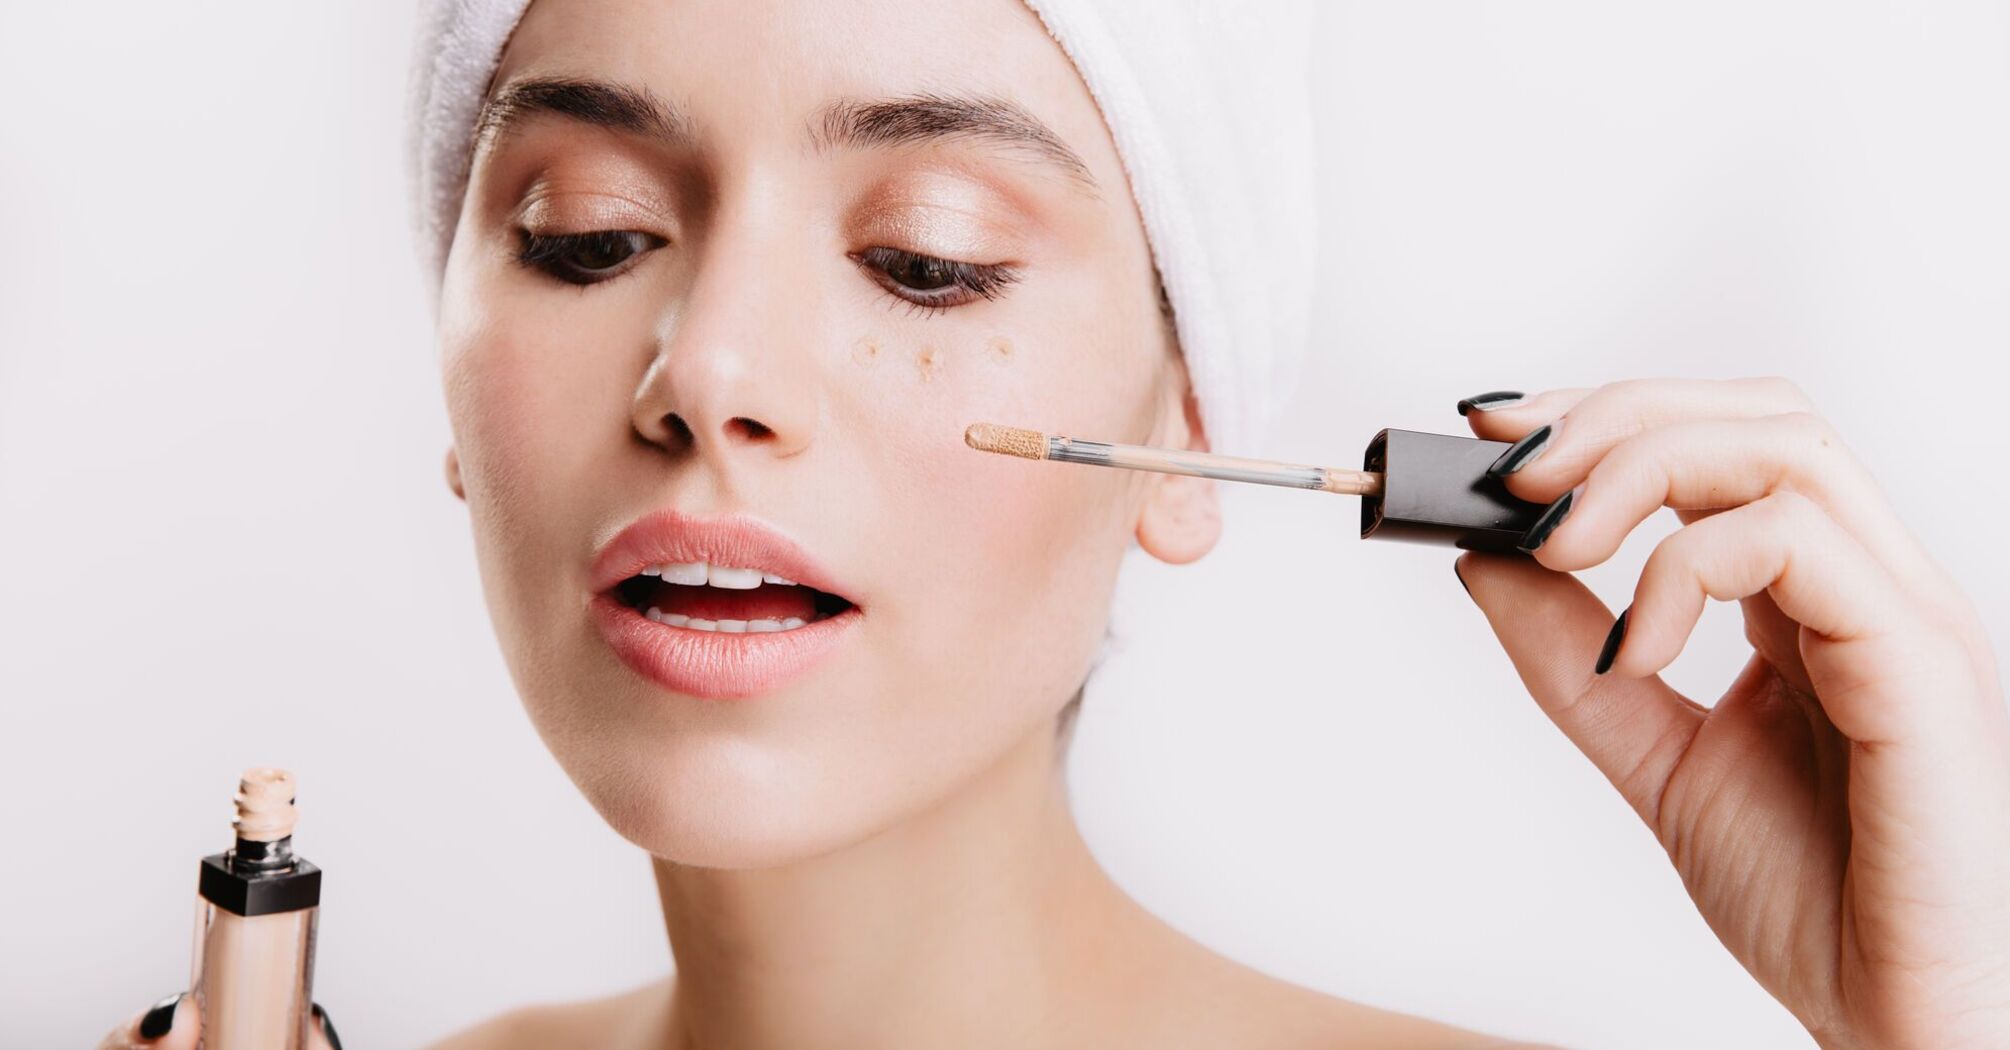 Forget about dark circles under the eyes and acne: how to apply concealer correctly